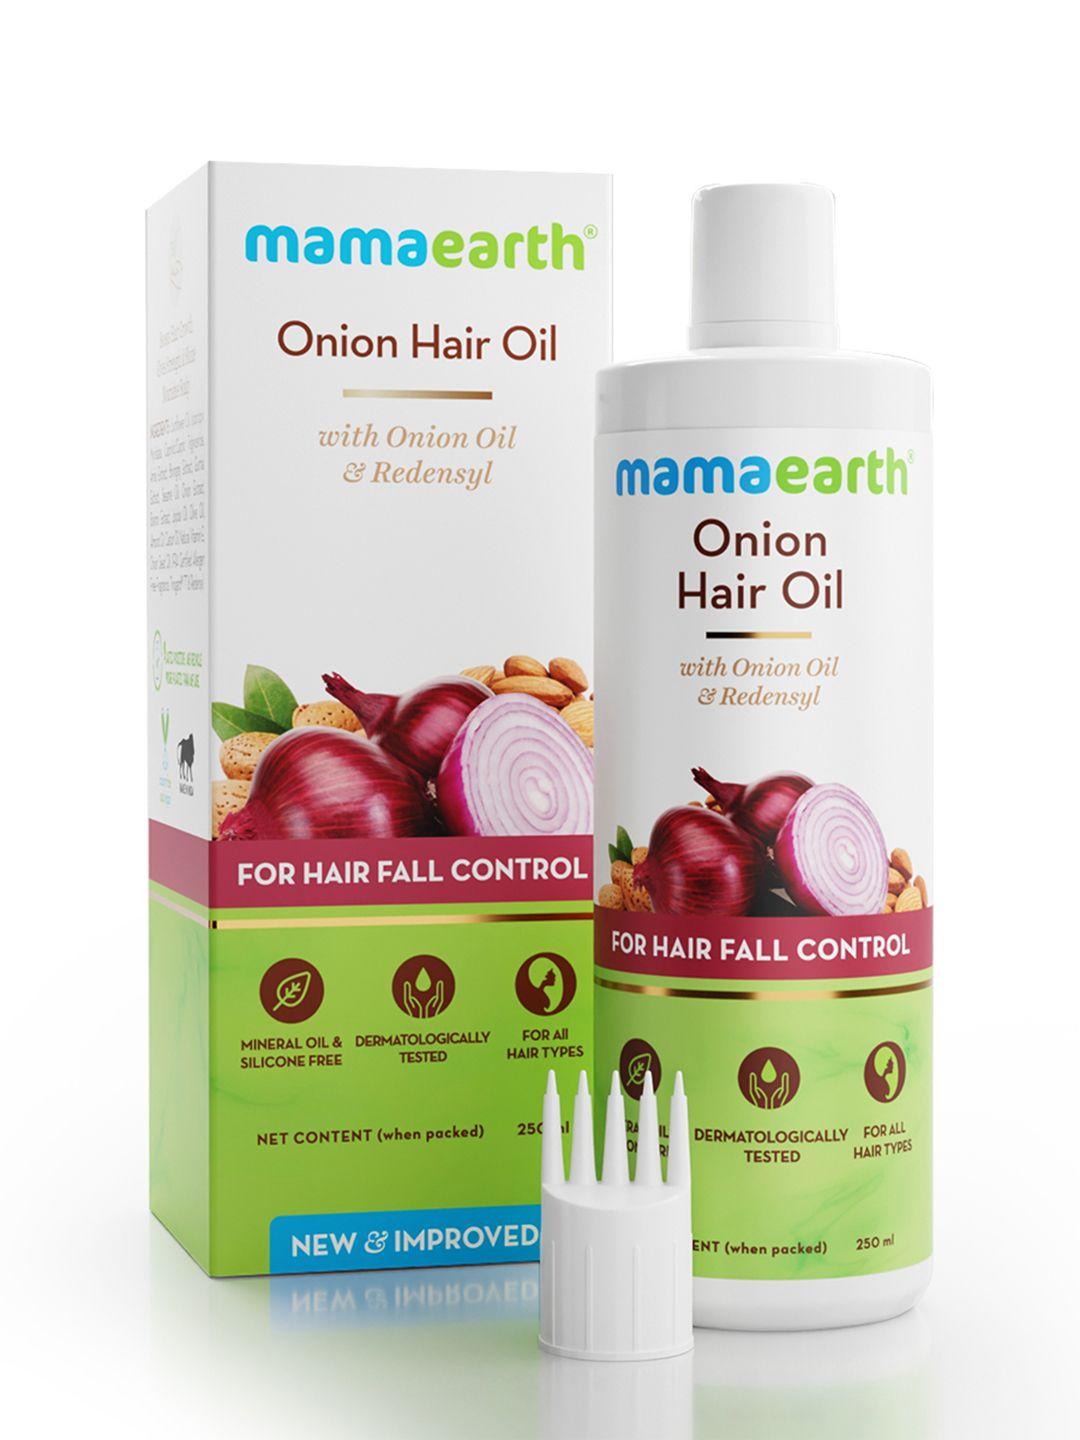 mamaearth-sustainable-onion-hair-oil-with-redensyl-for-hair-fall-control-250-ml